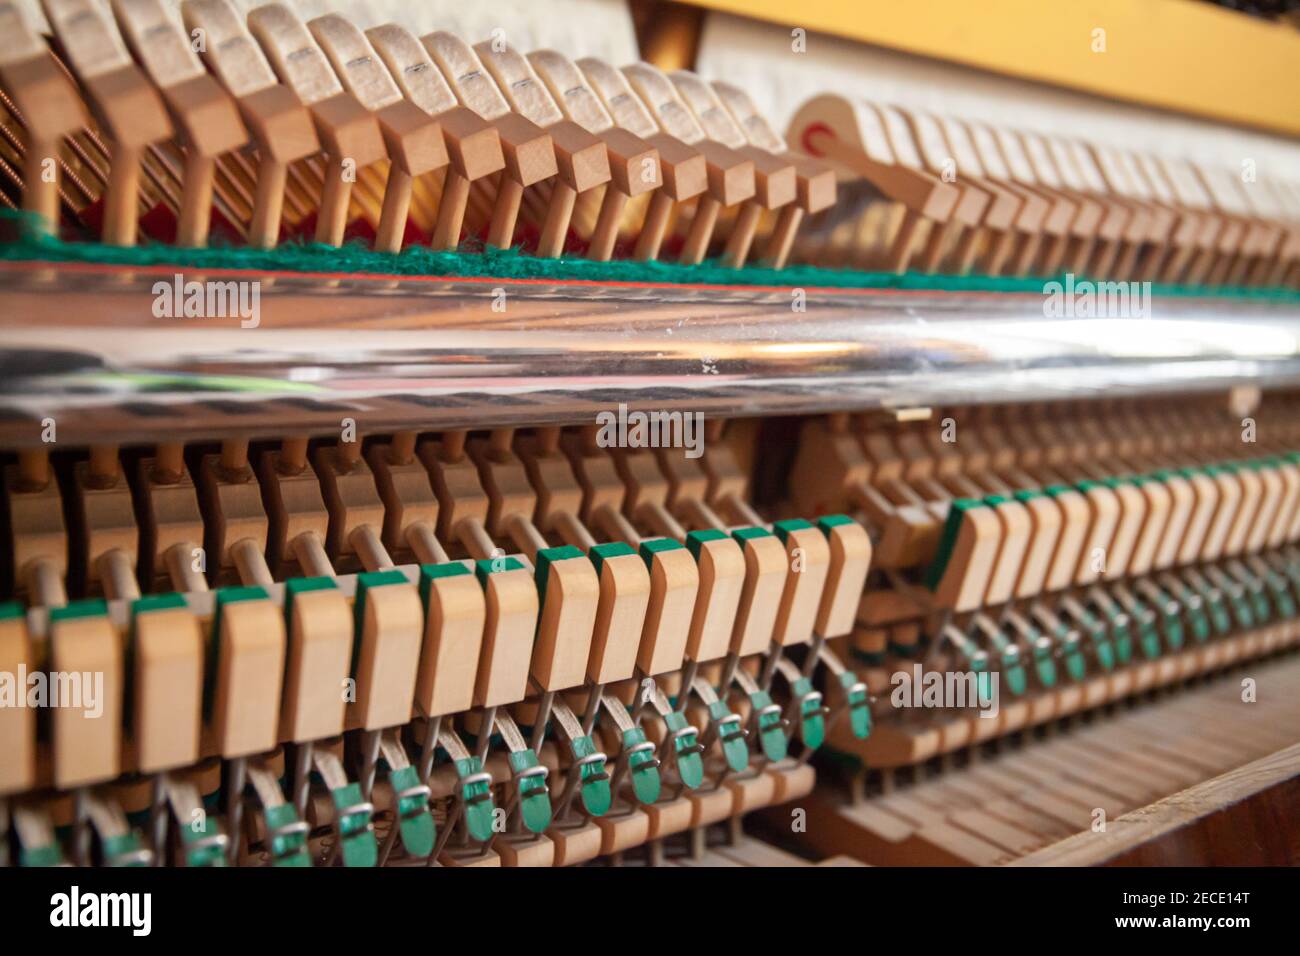 Open upright piano. Piano action close up. German piano action, internal mechanism. Piano tuning, repair and maintenance. Hammers. Stock Photo